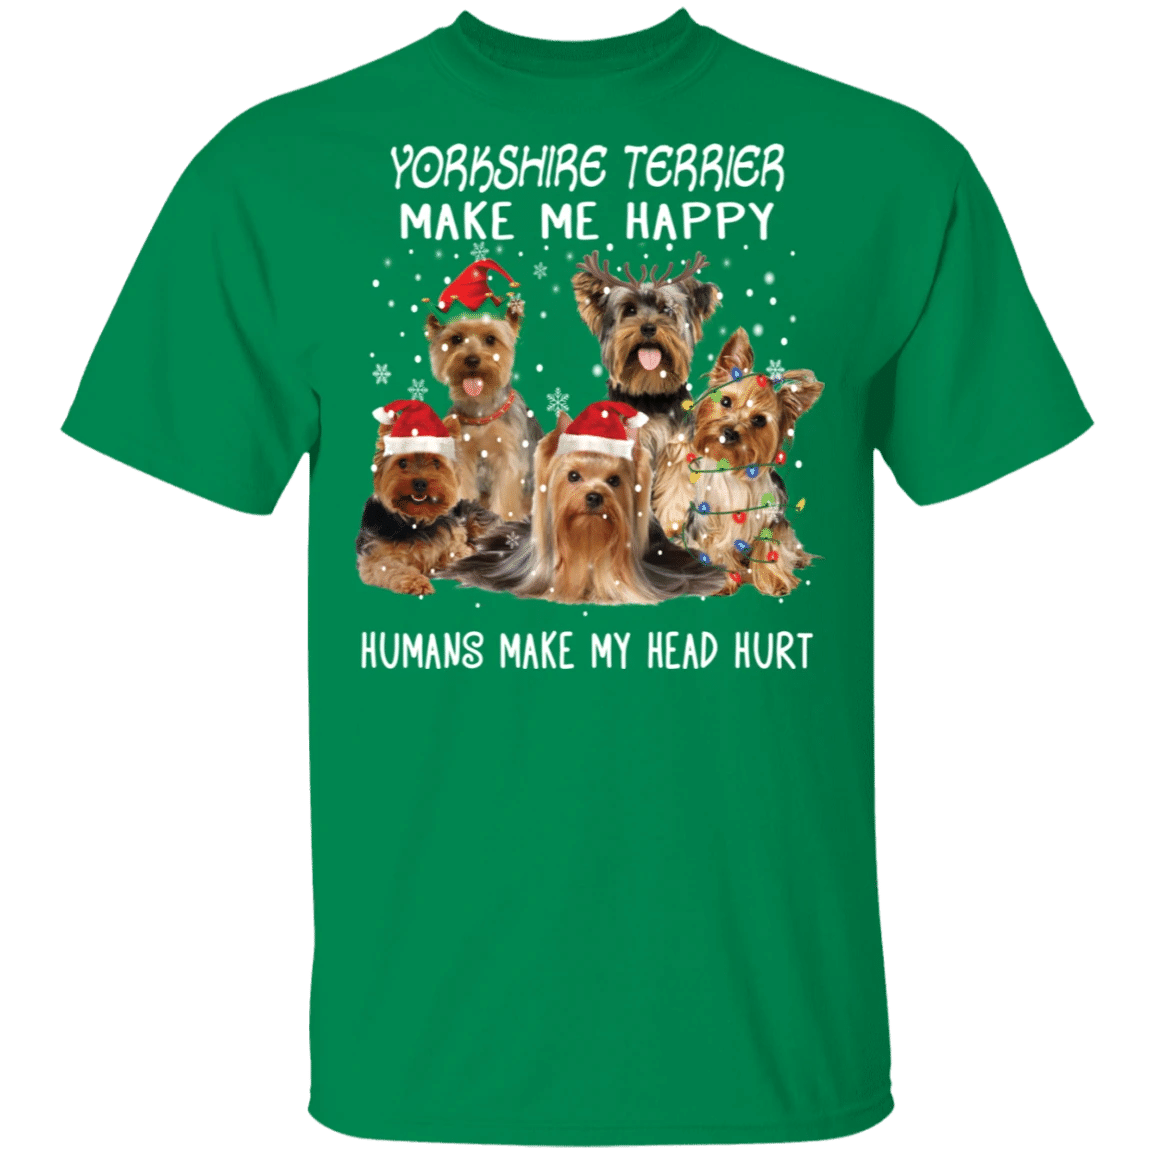 Yorkshire Terrier Make Me Happy Humans Make My Head Hurt T-Shirt Xmas Gift Idea For Dog Lovers